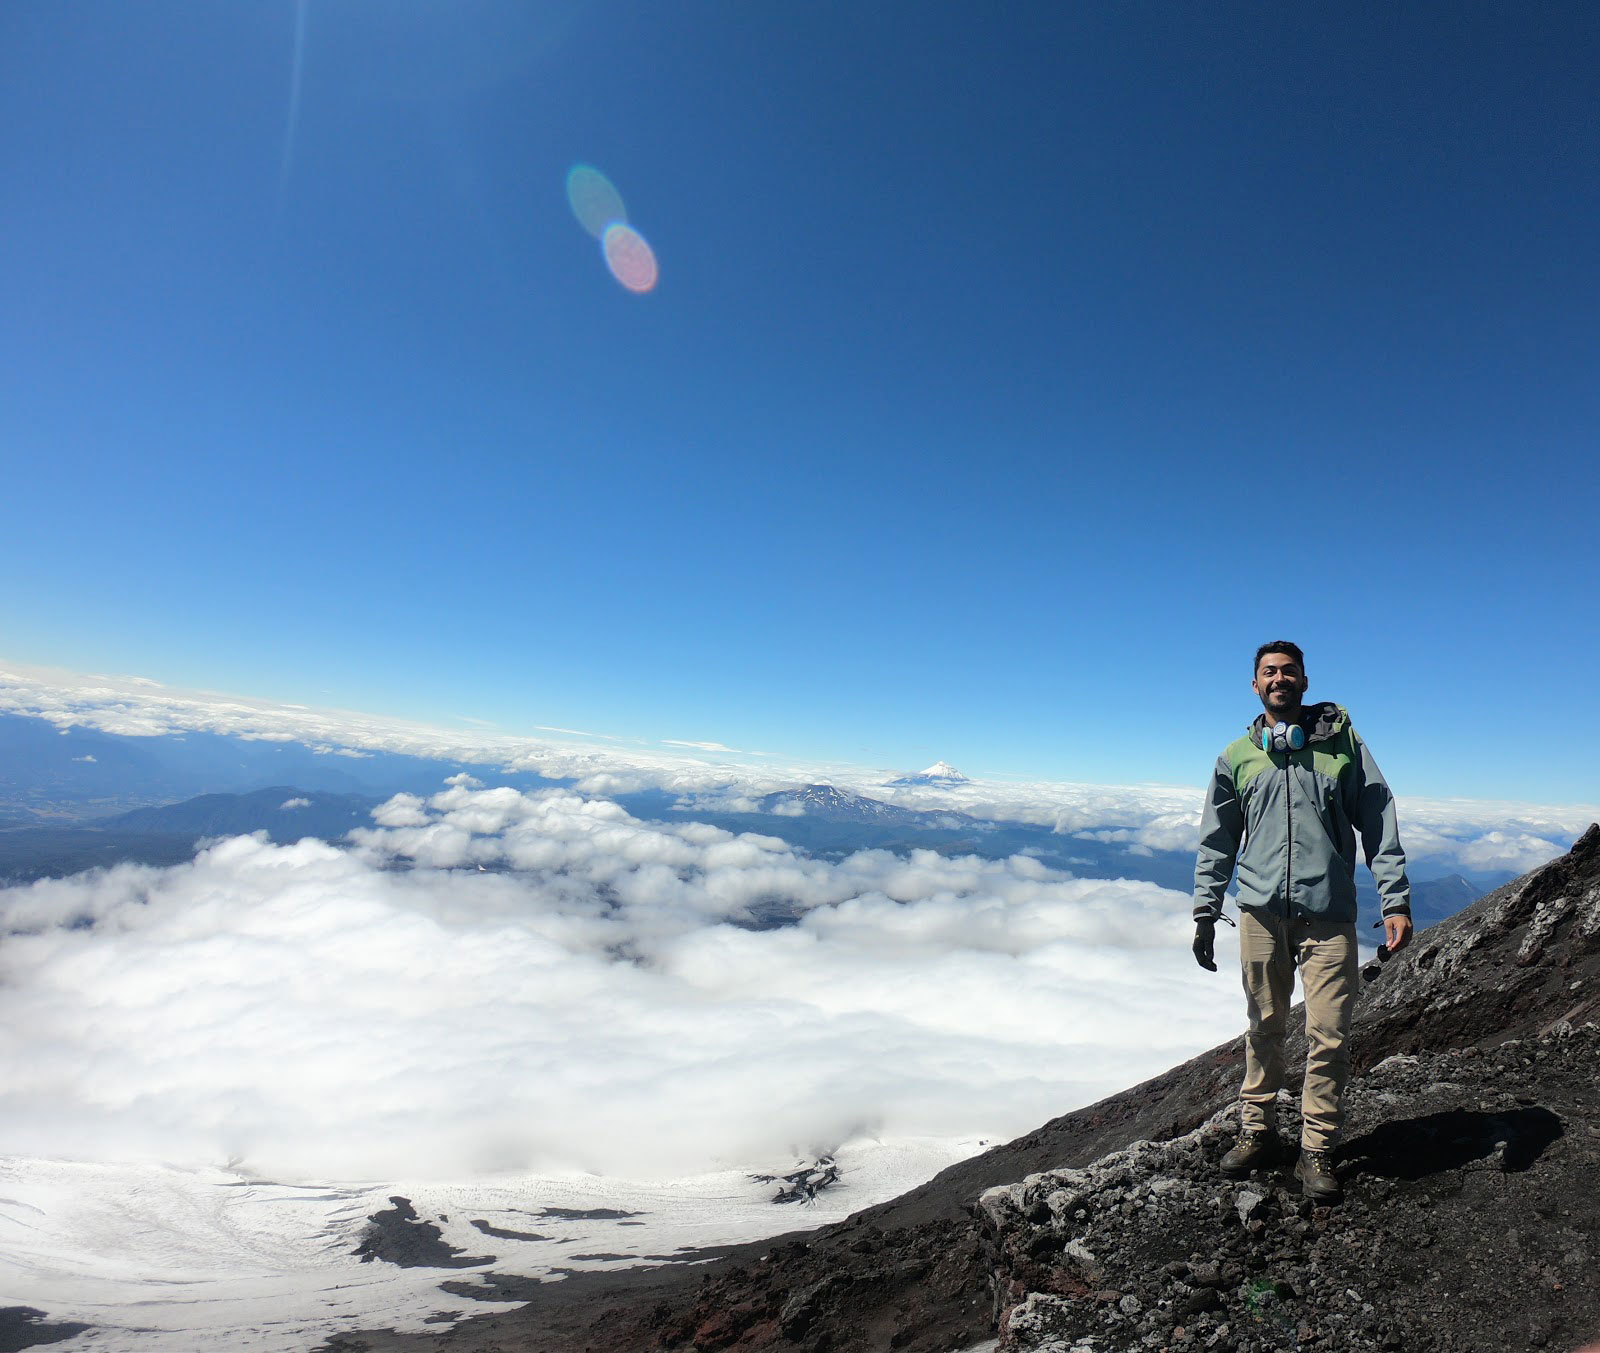 Ricardo standing on the top of a mountain with a beautiful landscape and clouds behind him